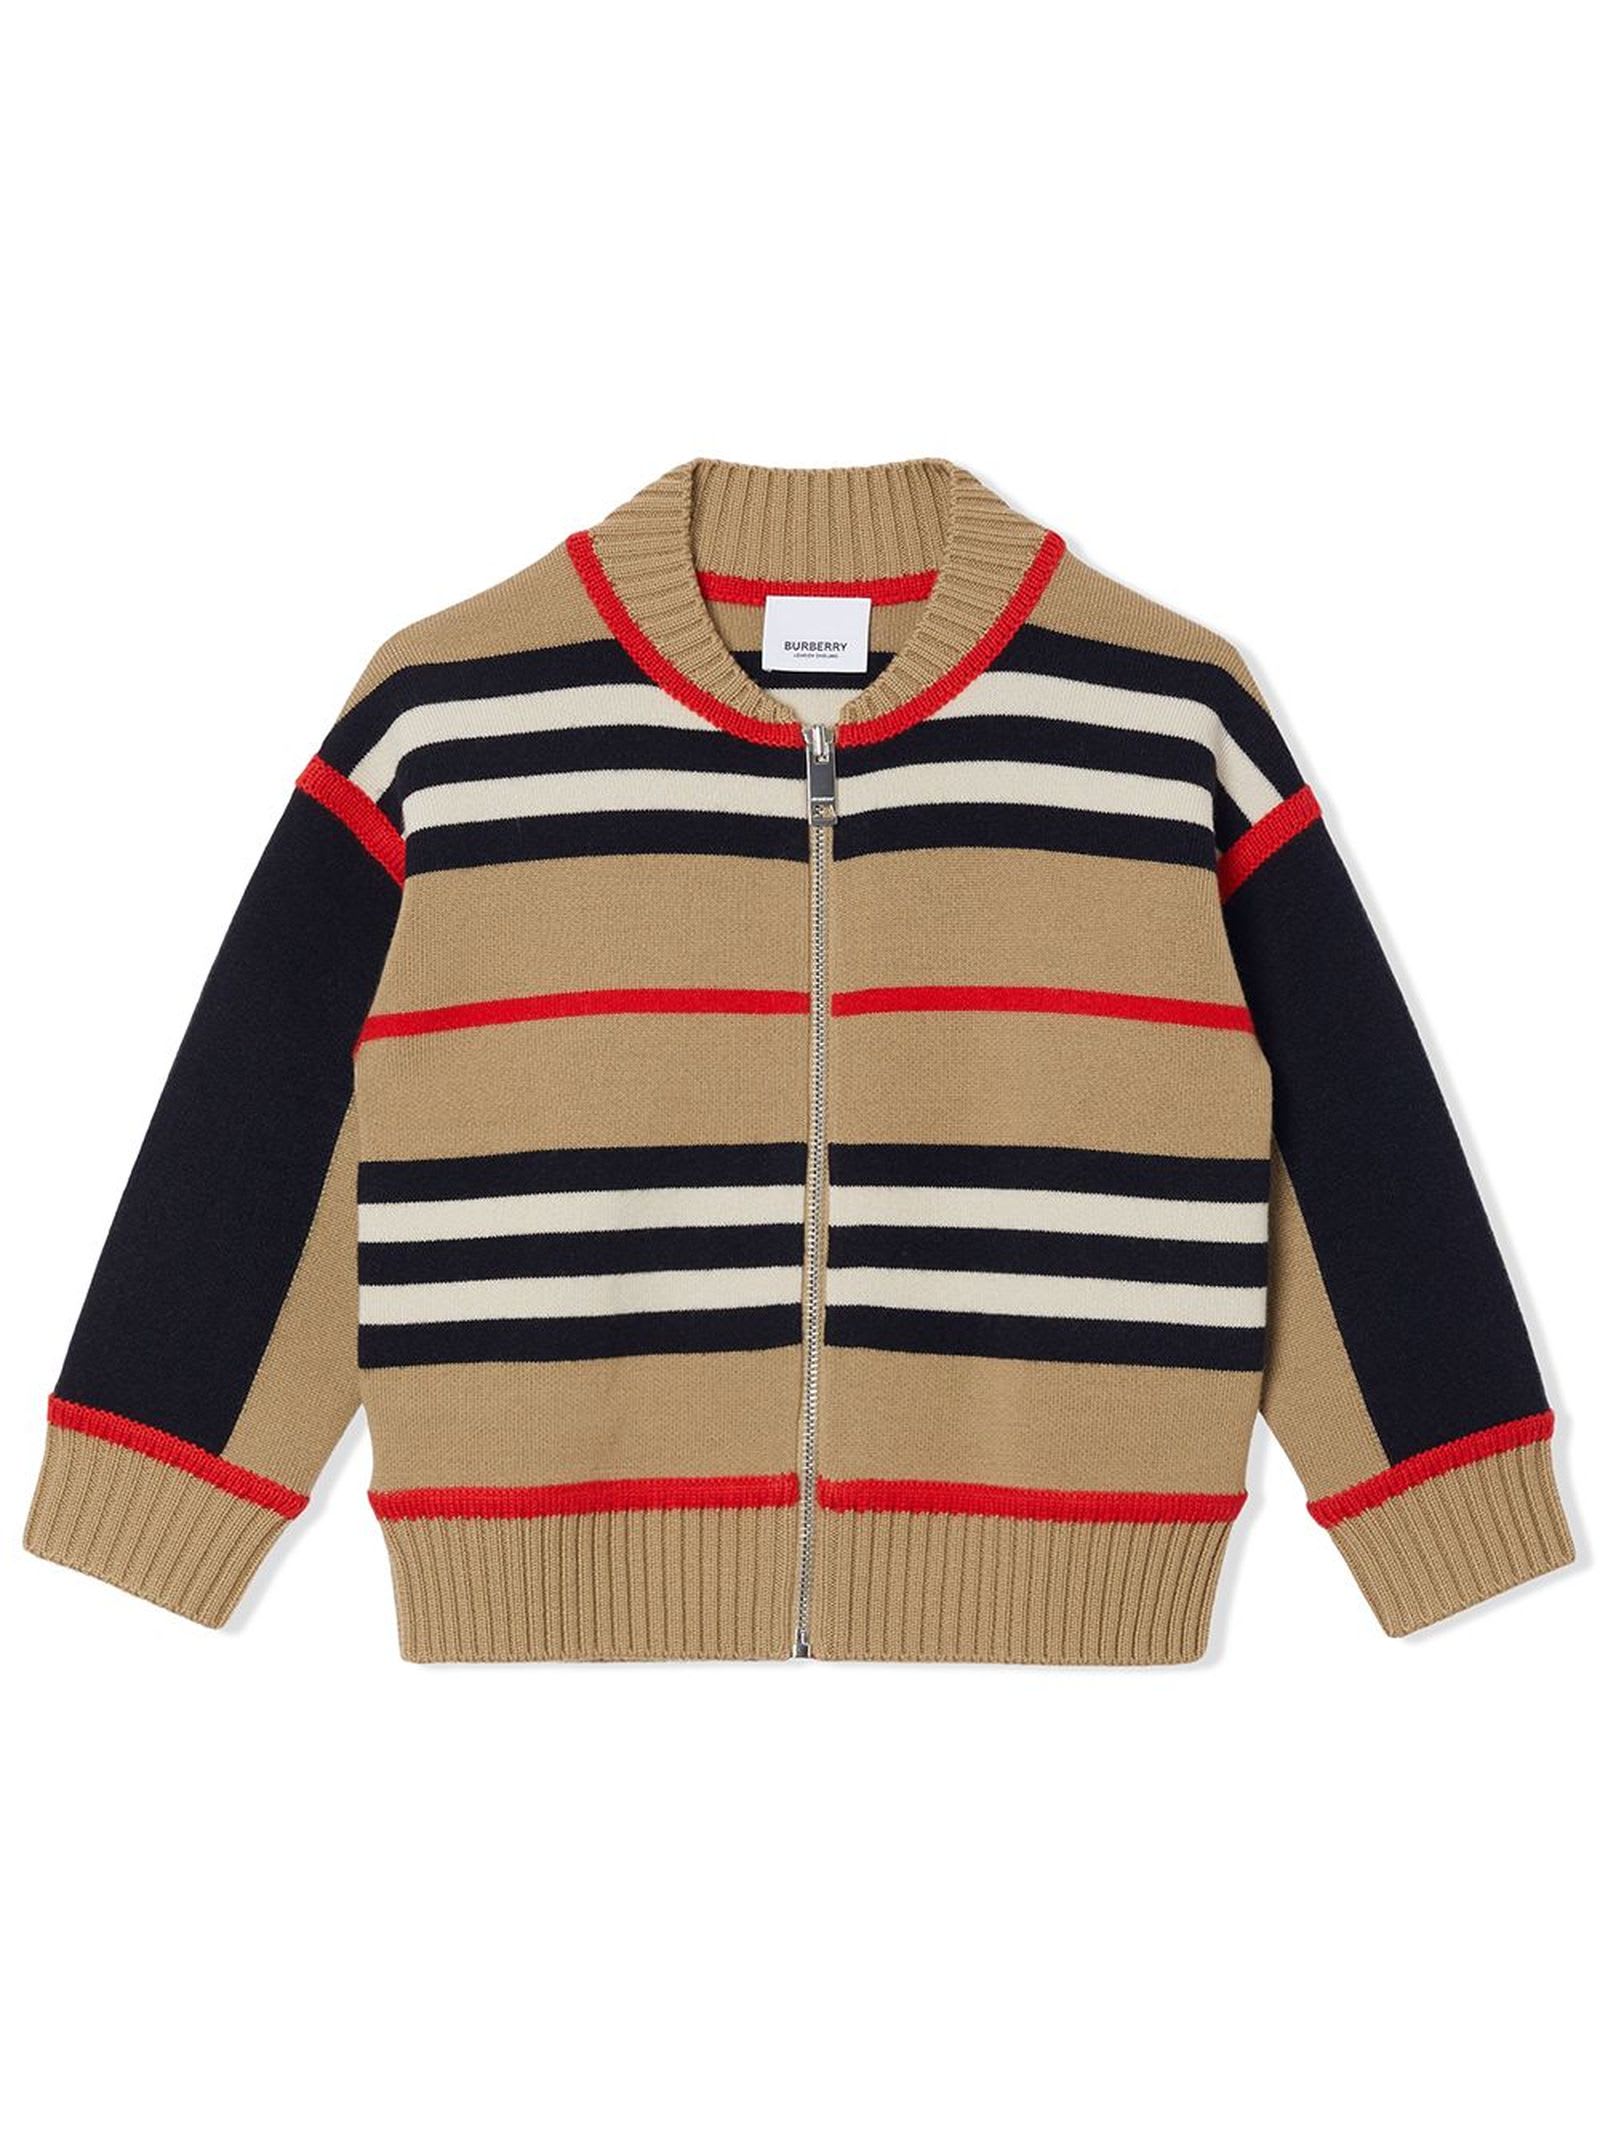 Burberry Beige Cashmere And Wool Blend Cardigan